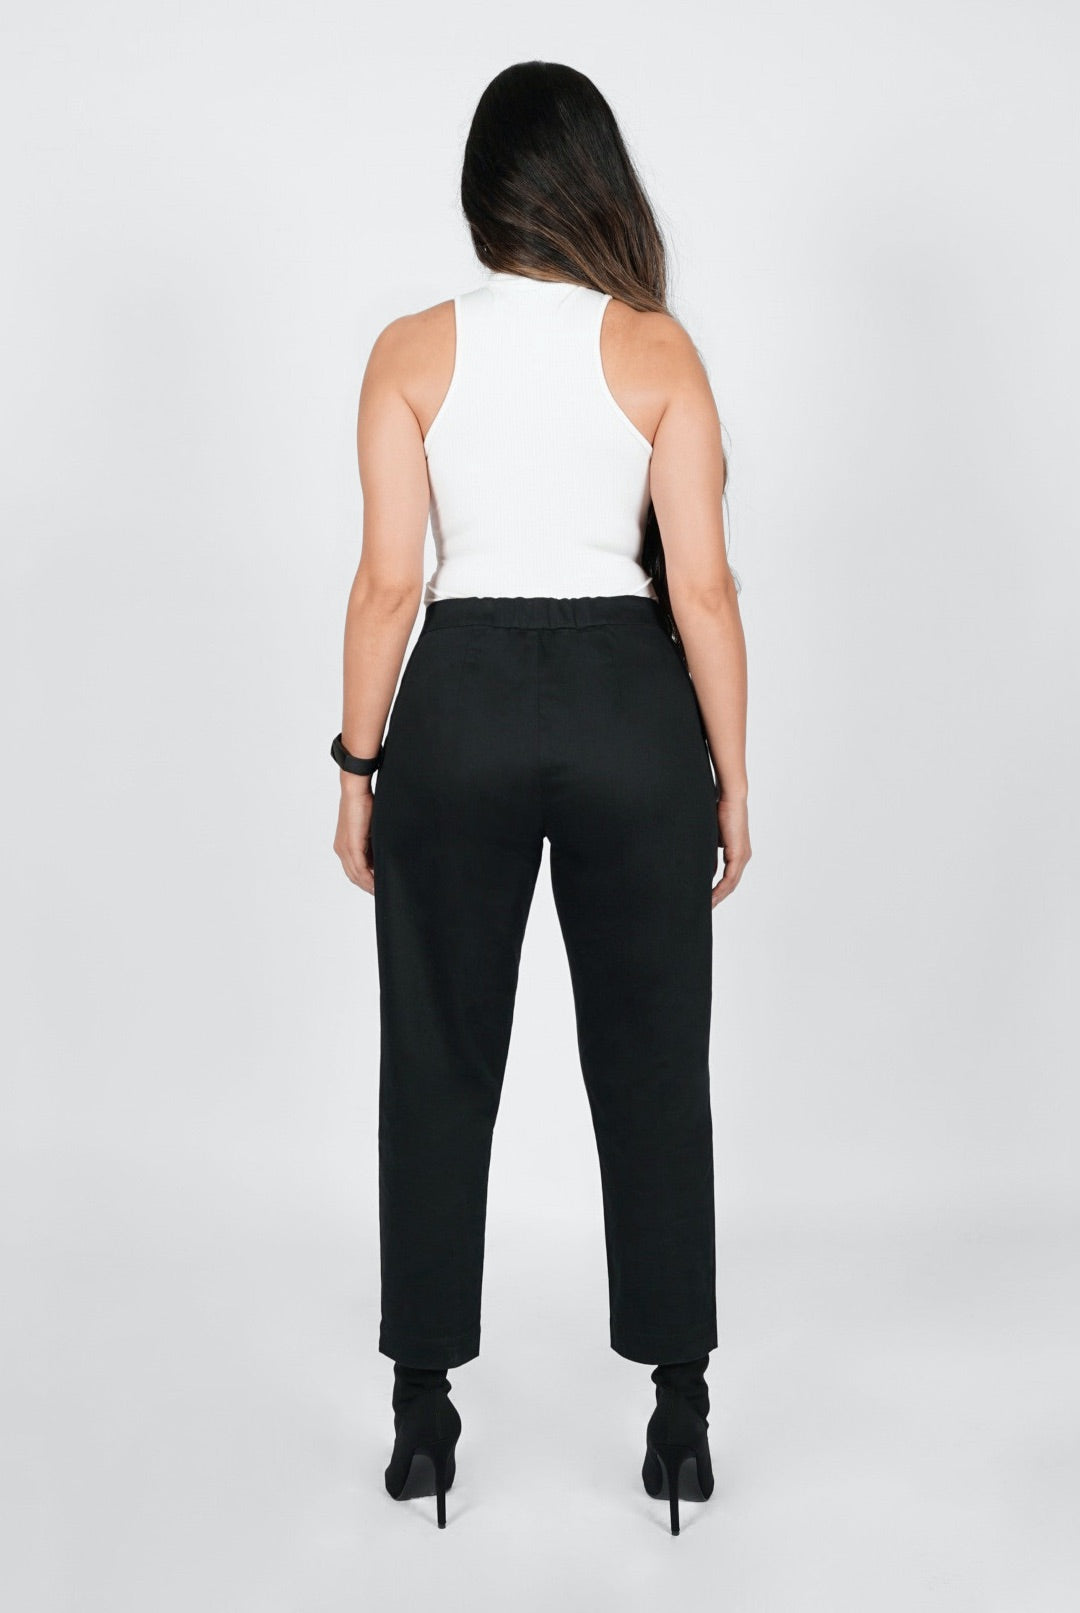 Washable Ladies Two Front Pockets And One Small Pockets Comfortable Black  Cotton Trouser at Best Price in Delhi | Rajesh Paliwal Traders